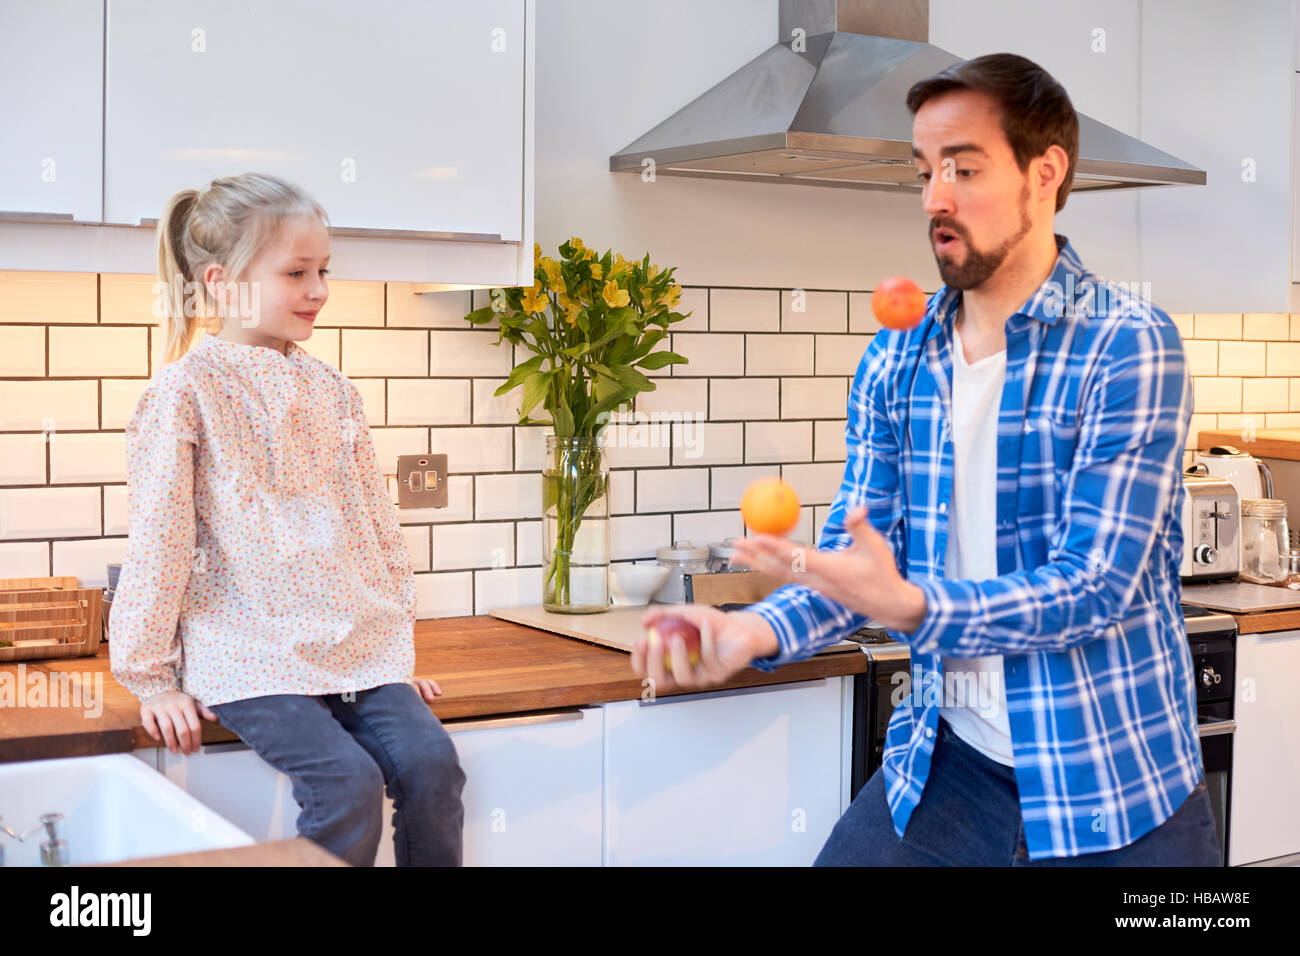 Mid adult man juggling fruit for daughter in kitchen Stock Photo